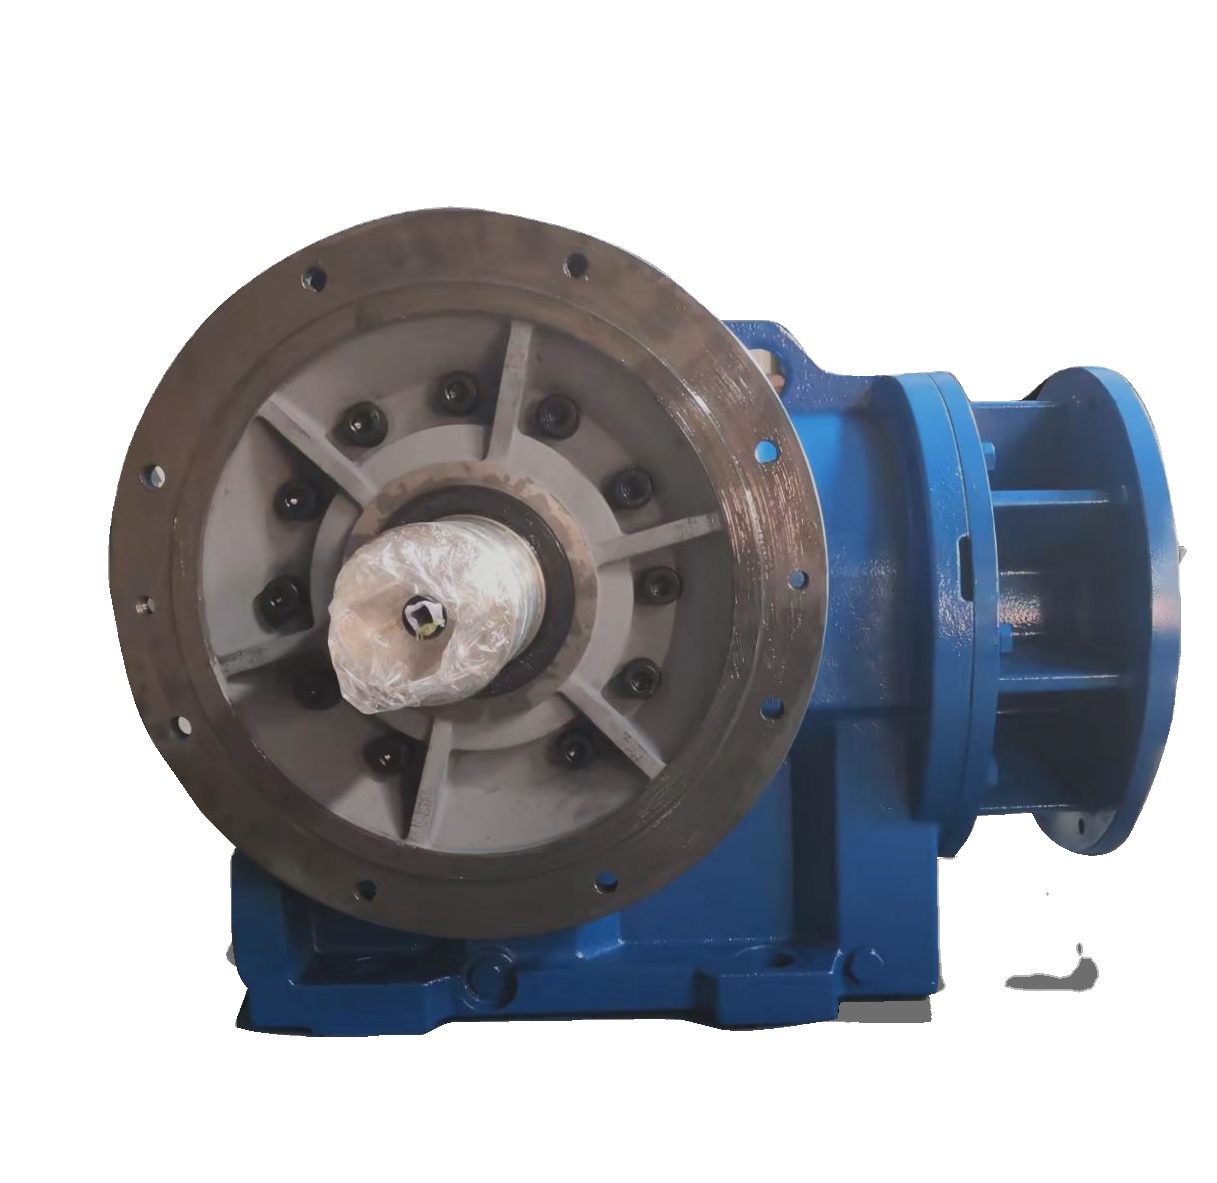 EVERGEAR DRIVE K series right angle gearbox para sa concrete mixer motor gear reducer